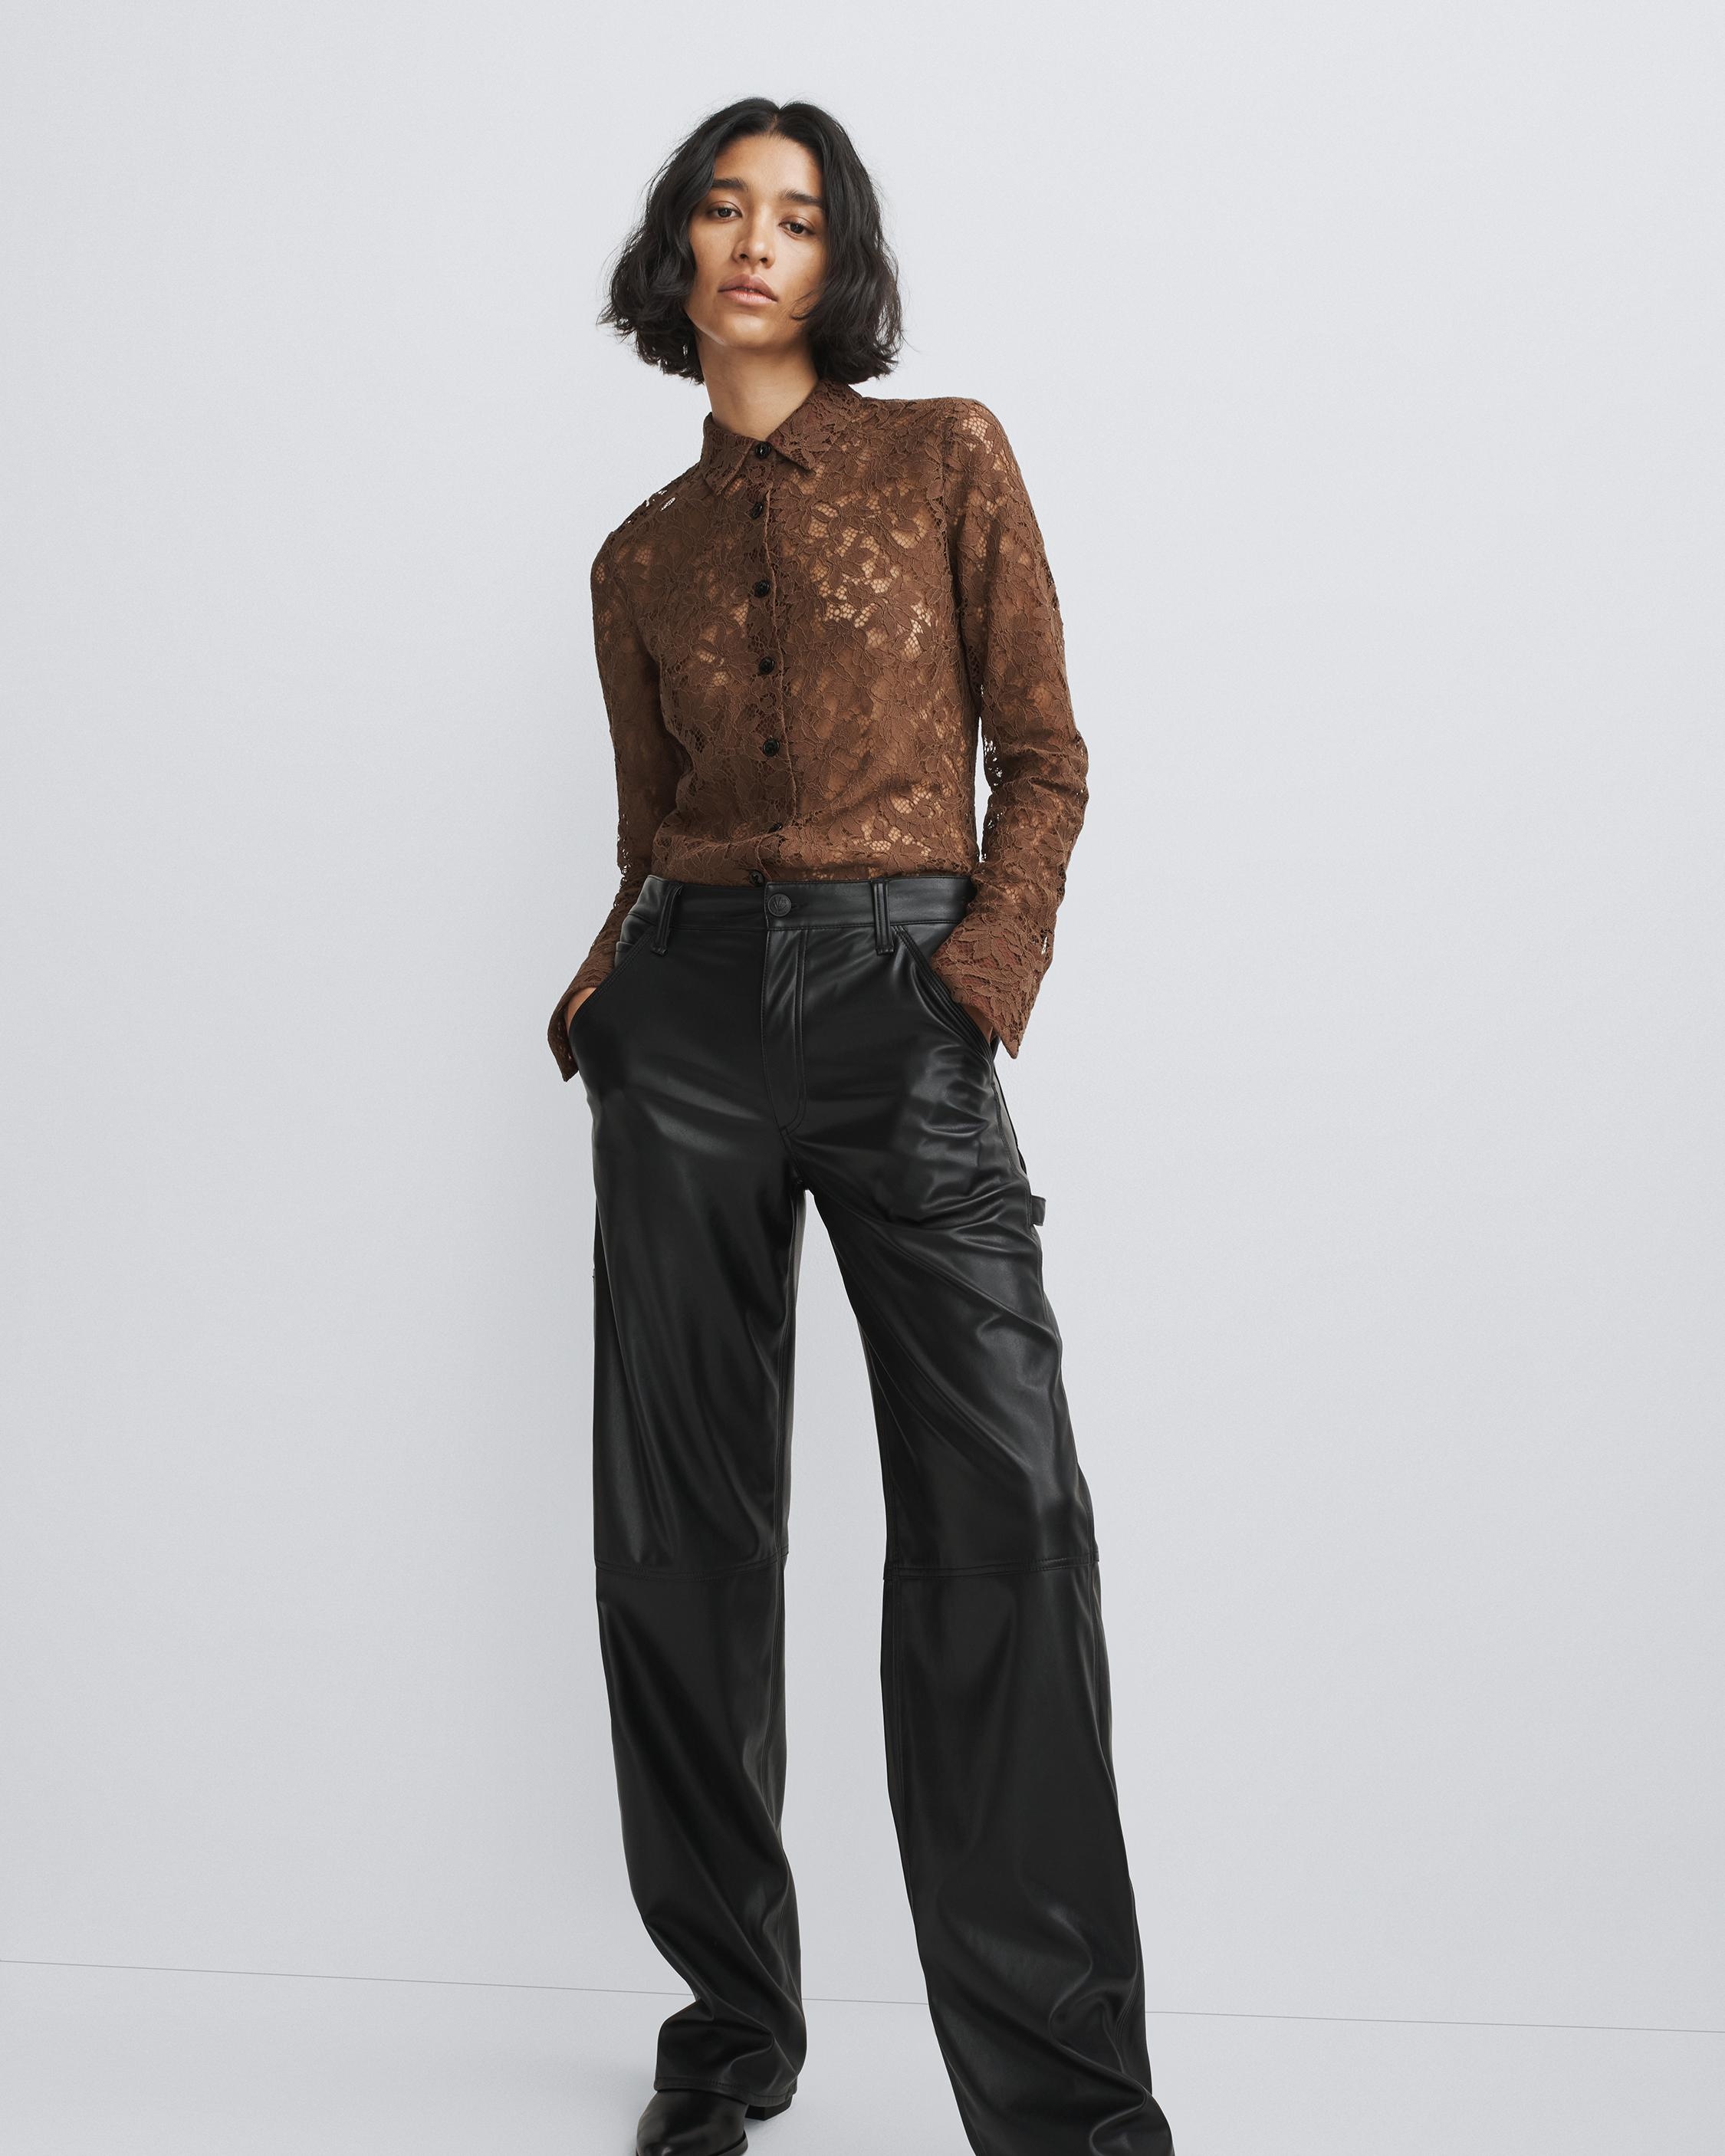 Sid Faux Leather Carpenter Pant
Relaxed Fit - 2